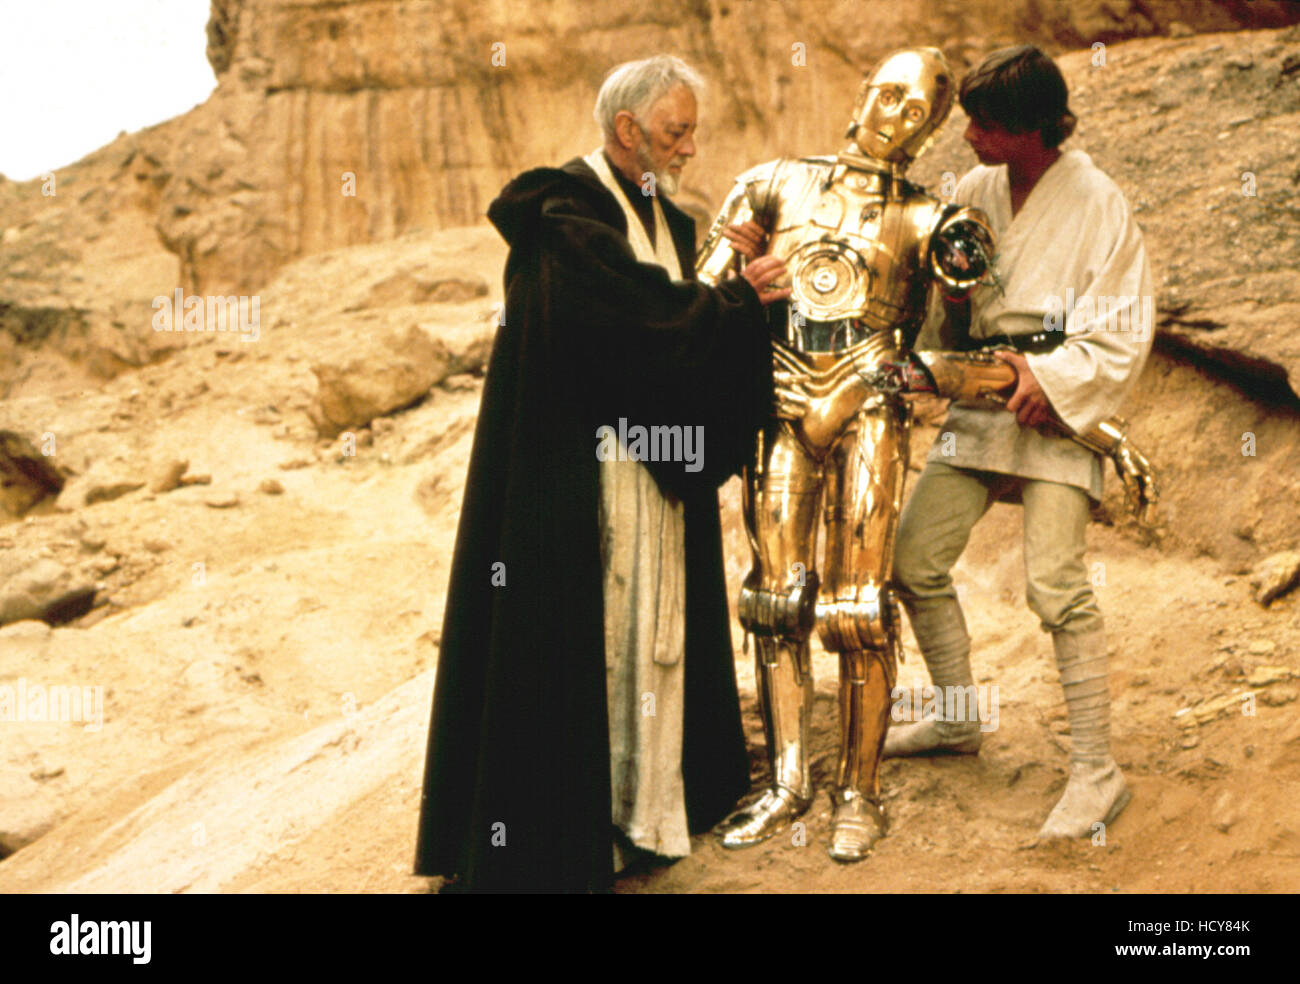 STAR WARS, (aka STAR WARS: EPISODE IV - A NEW HOPE), Alec Guinness, Anthony Daniels as C-3PO, Mark Hamill, 1977 Stock Photo